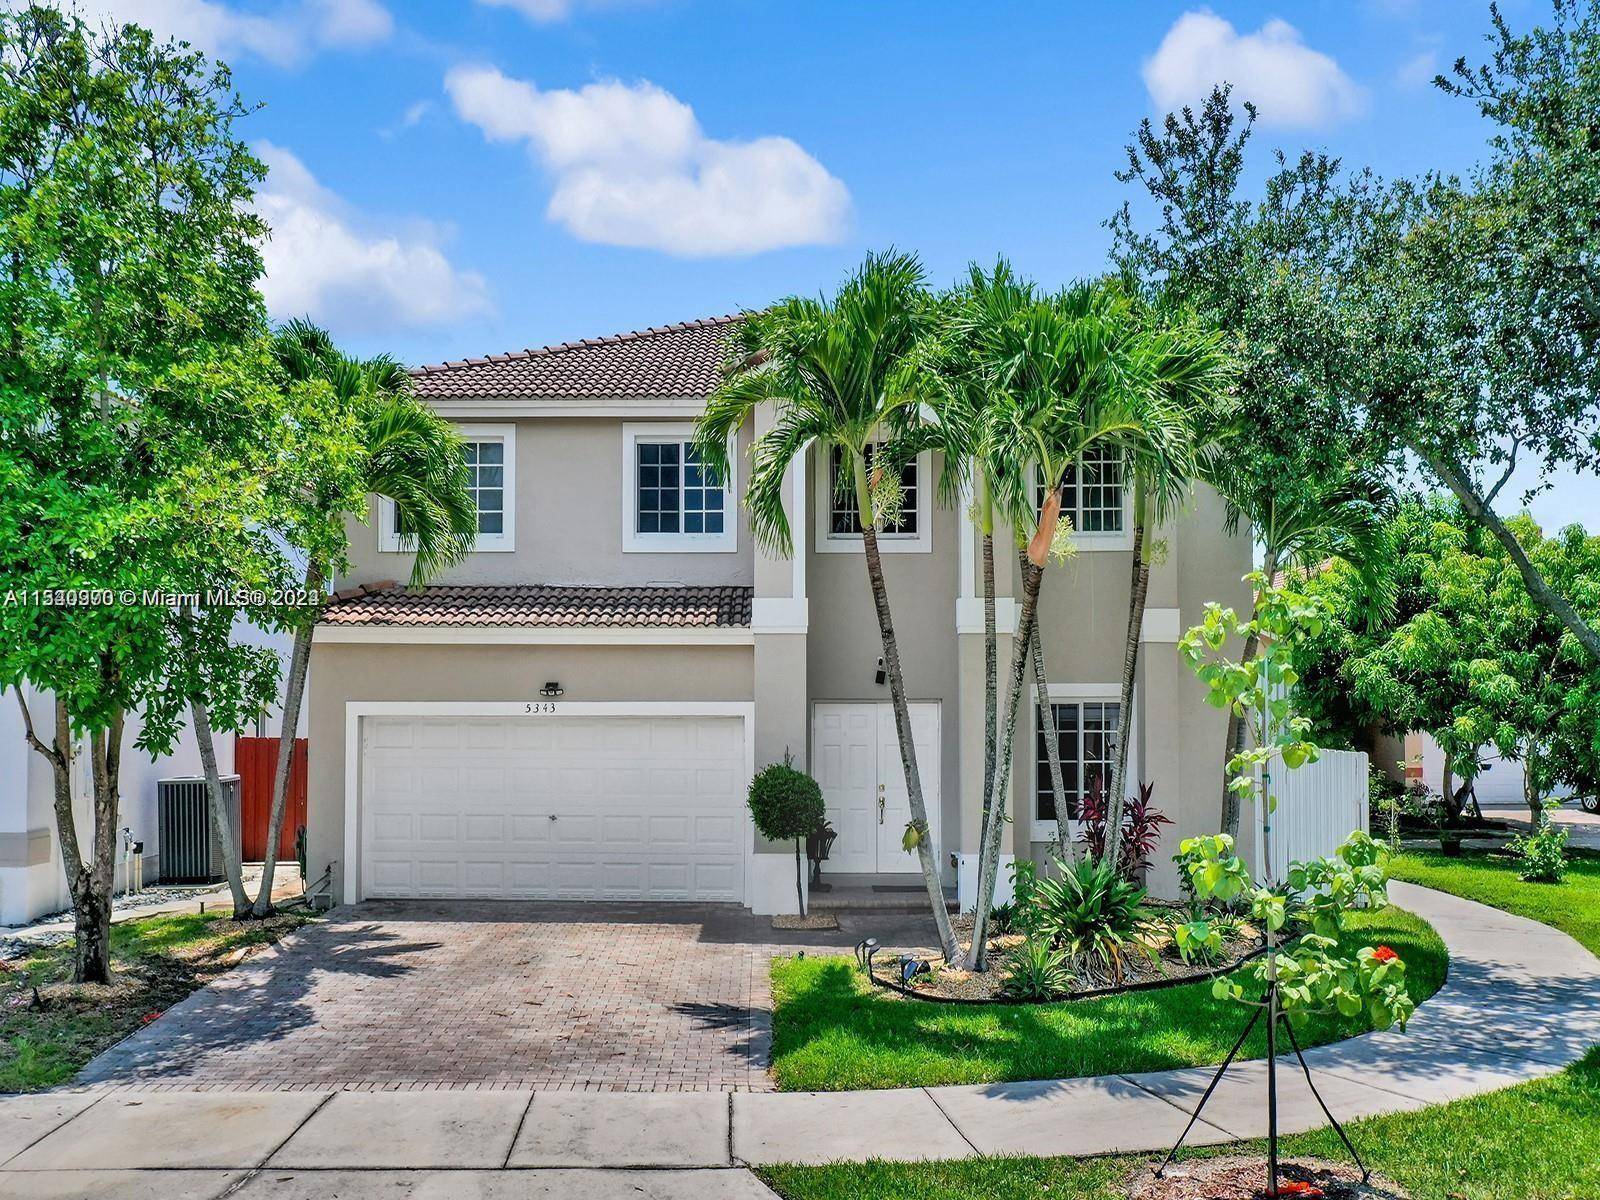 STOP, THIS IS IT ! 2 story corner home with spacious 4 beds, 4 baths, 2 car garage and large pool with covered patio in gated Doral Gardens.